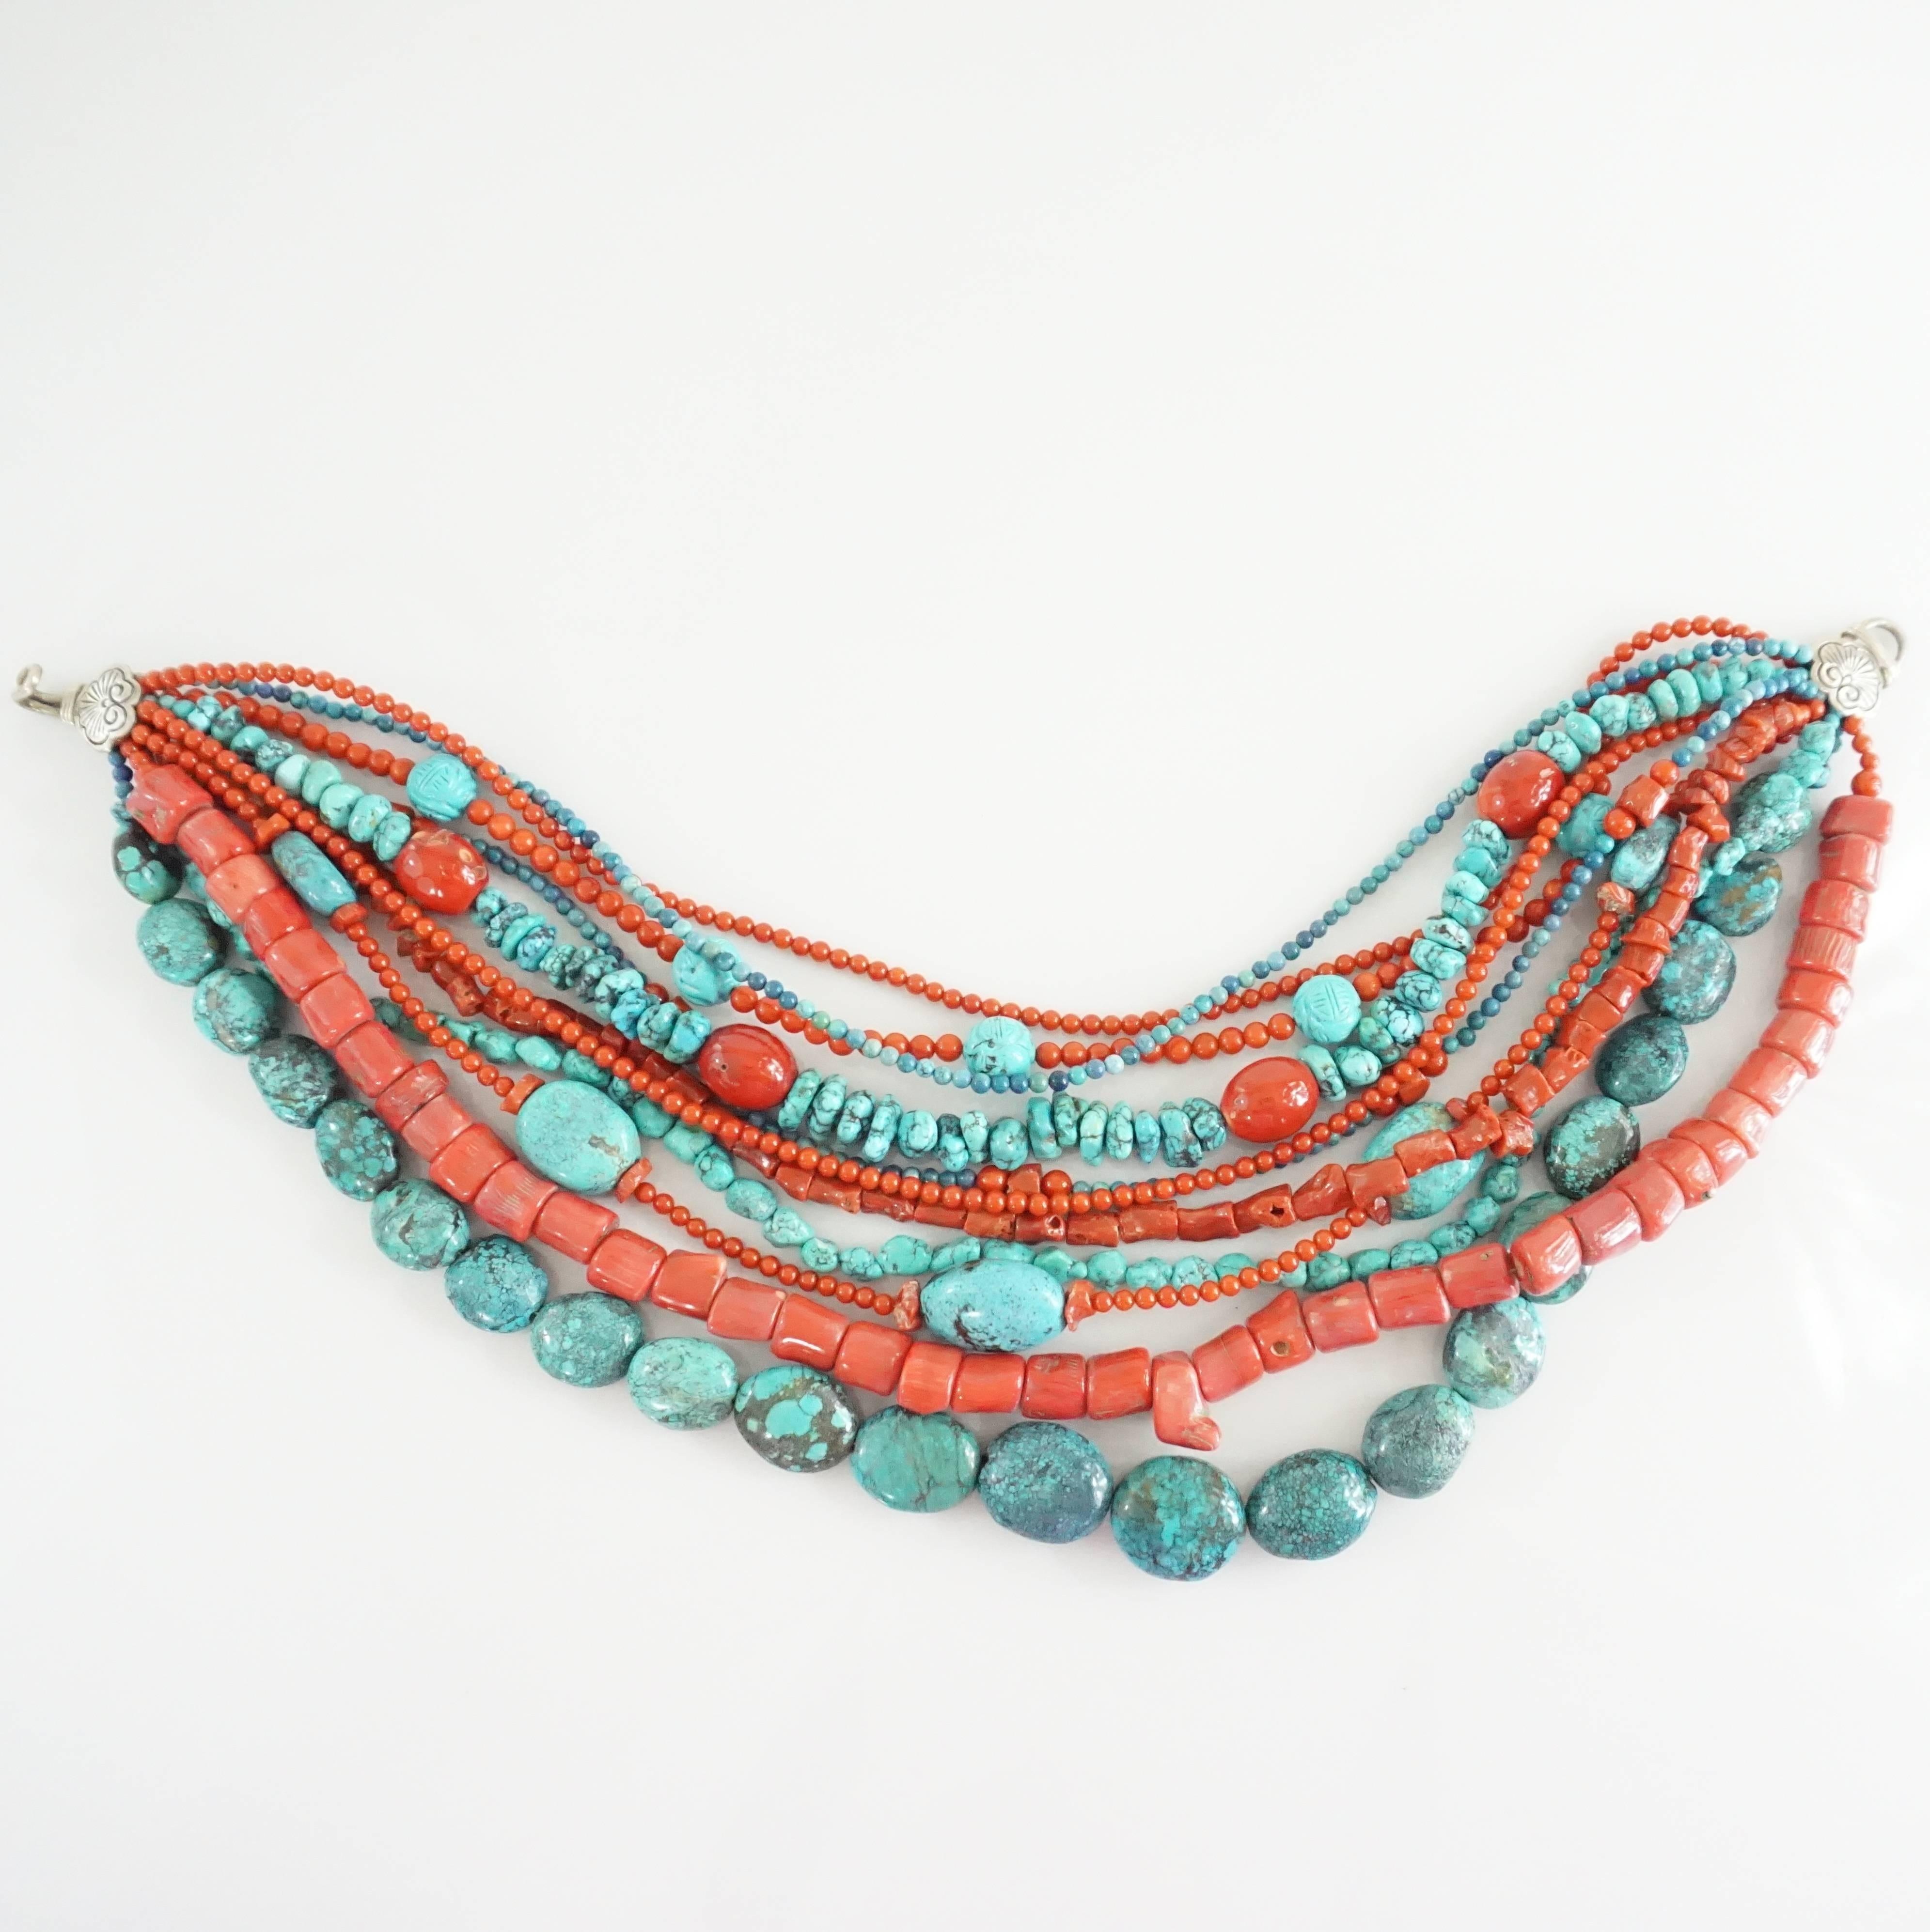 This Stephen Dweck necklace has 11 strands of turquoise and coral. It has a silver closure and different size and shaped beads. This necklace is in excellent condition. 

Measurements
Length: 17"
Width: 2"- 4"